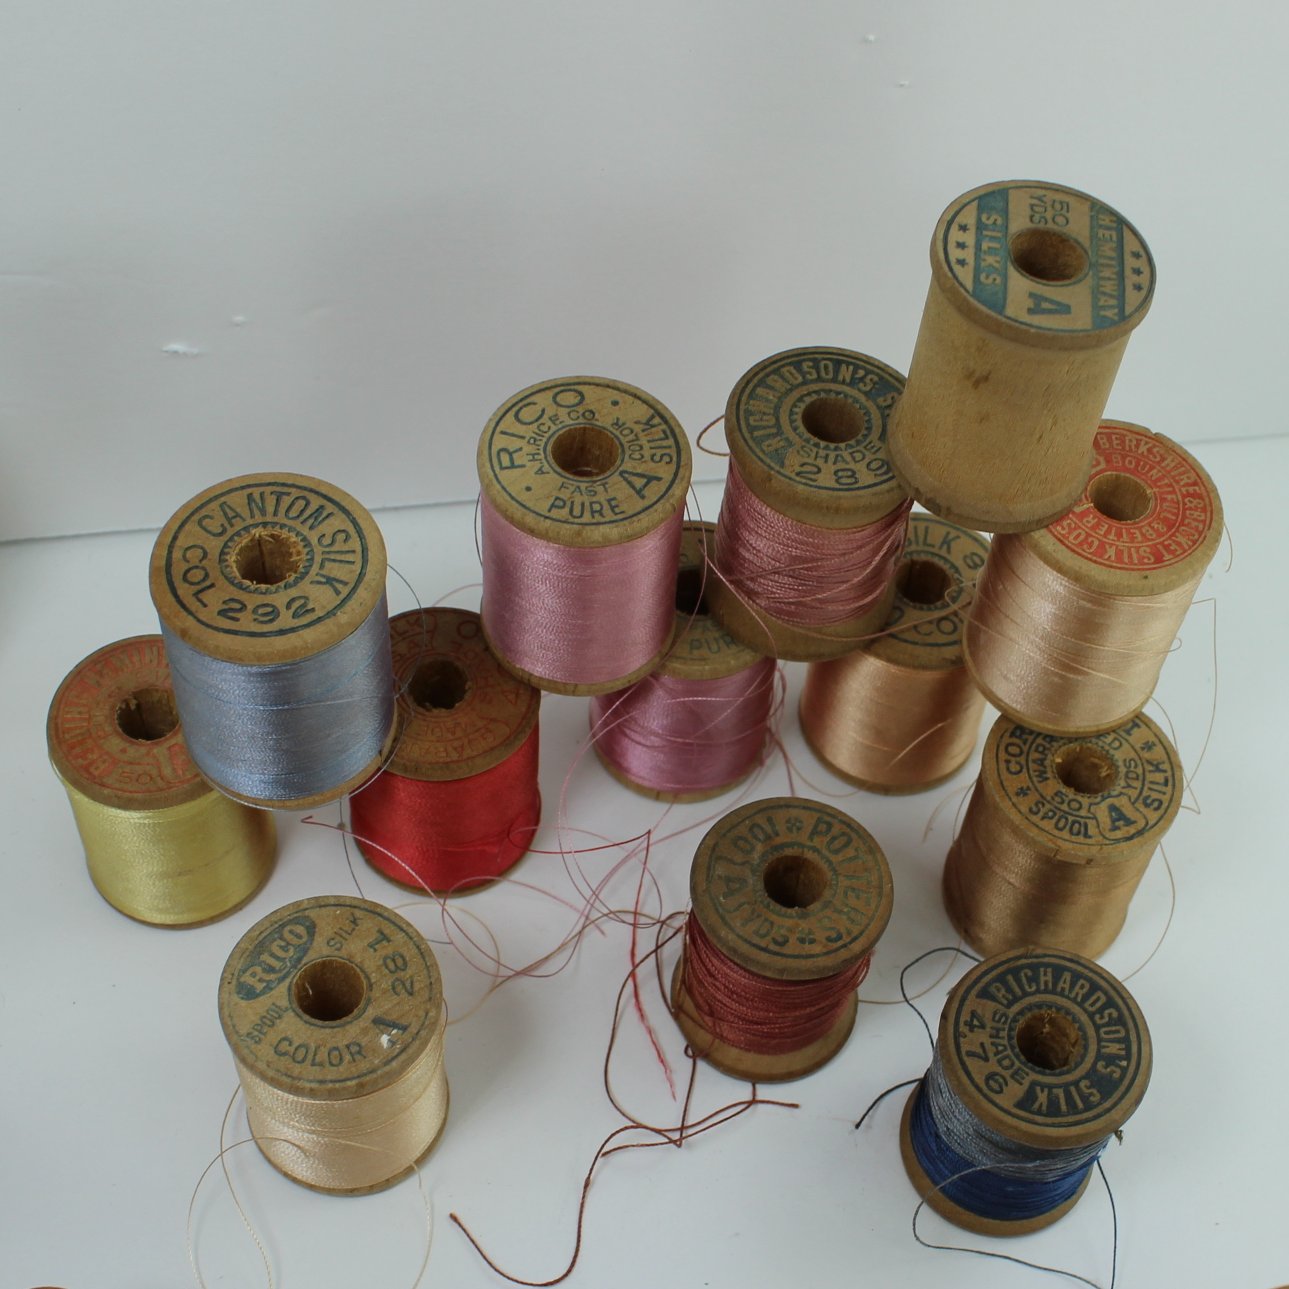 A bunch of spools of thread and spools of thread on a Image